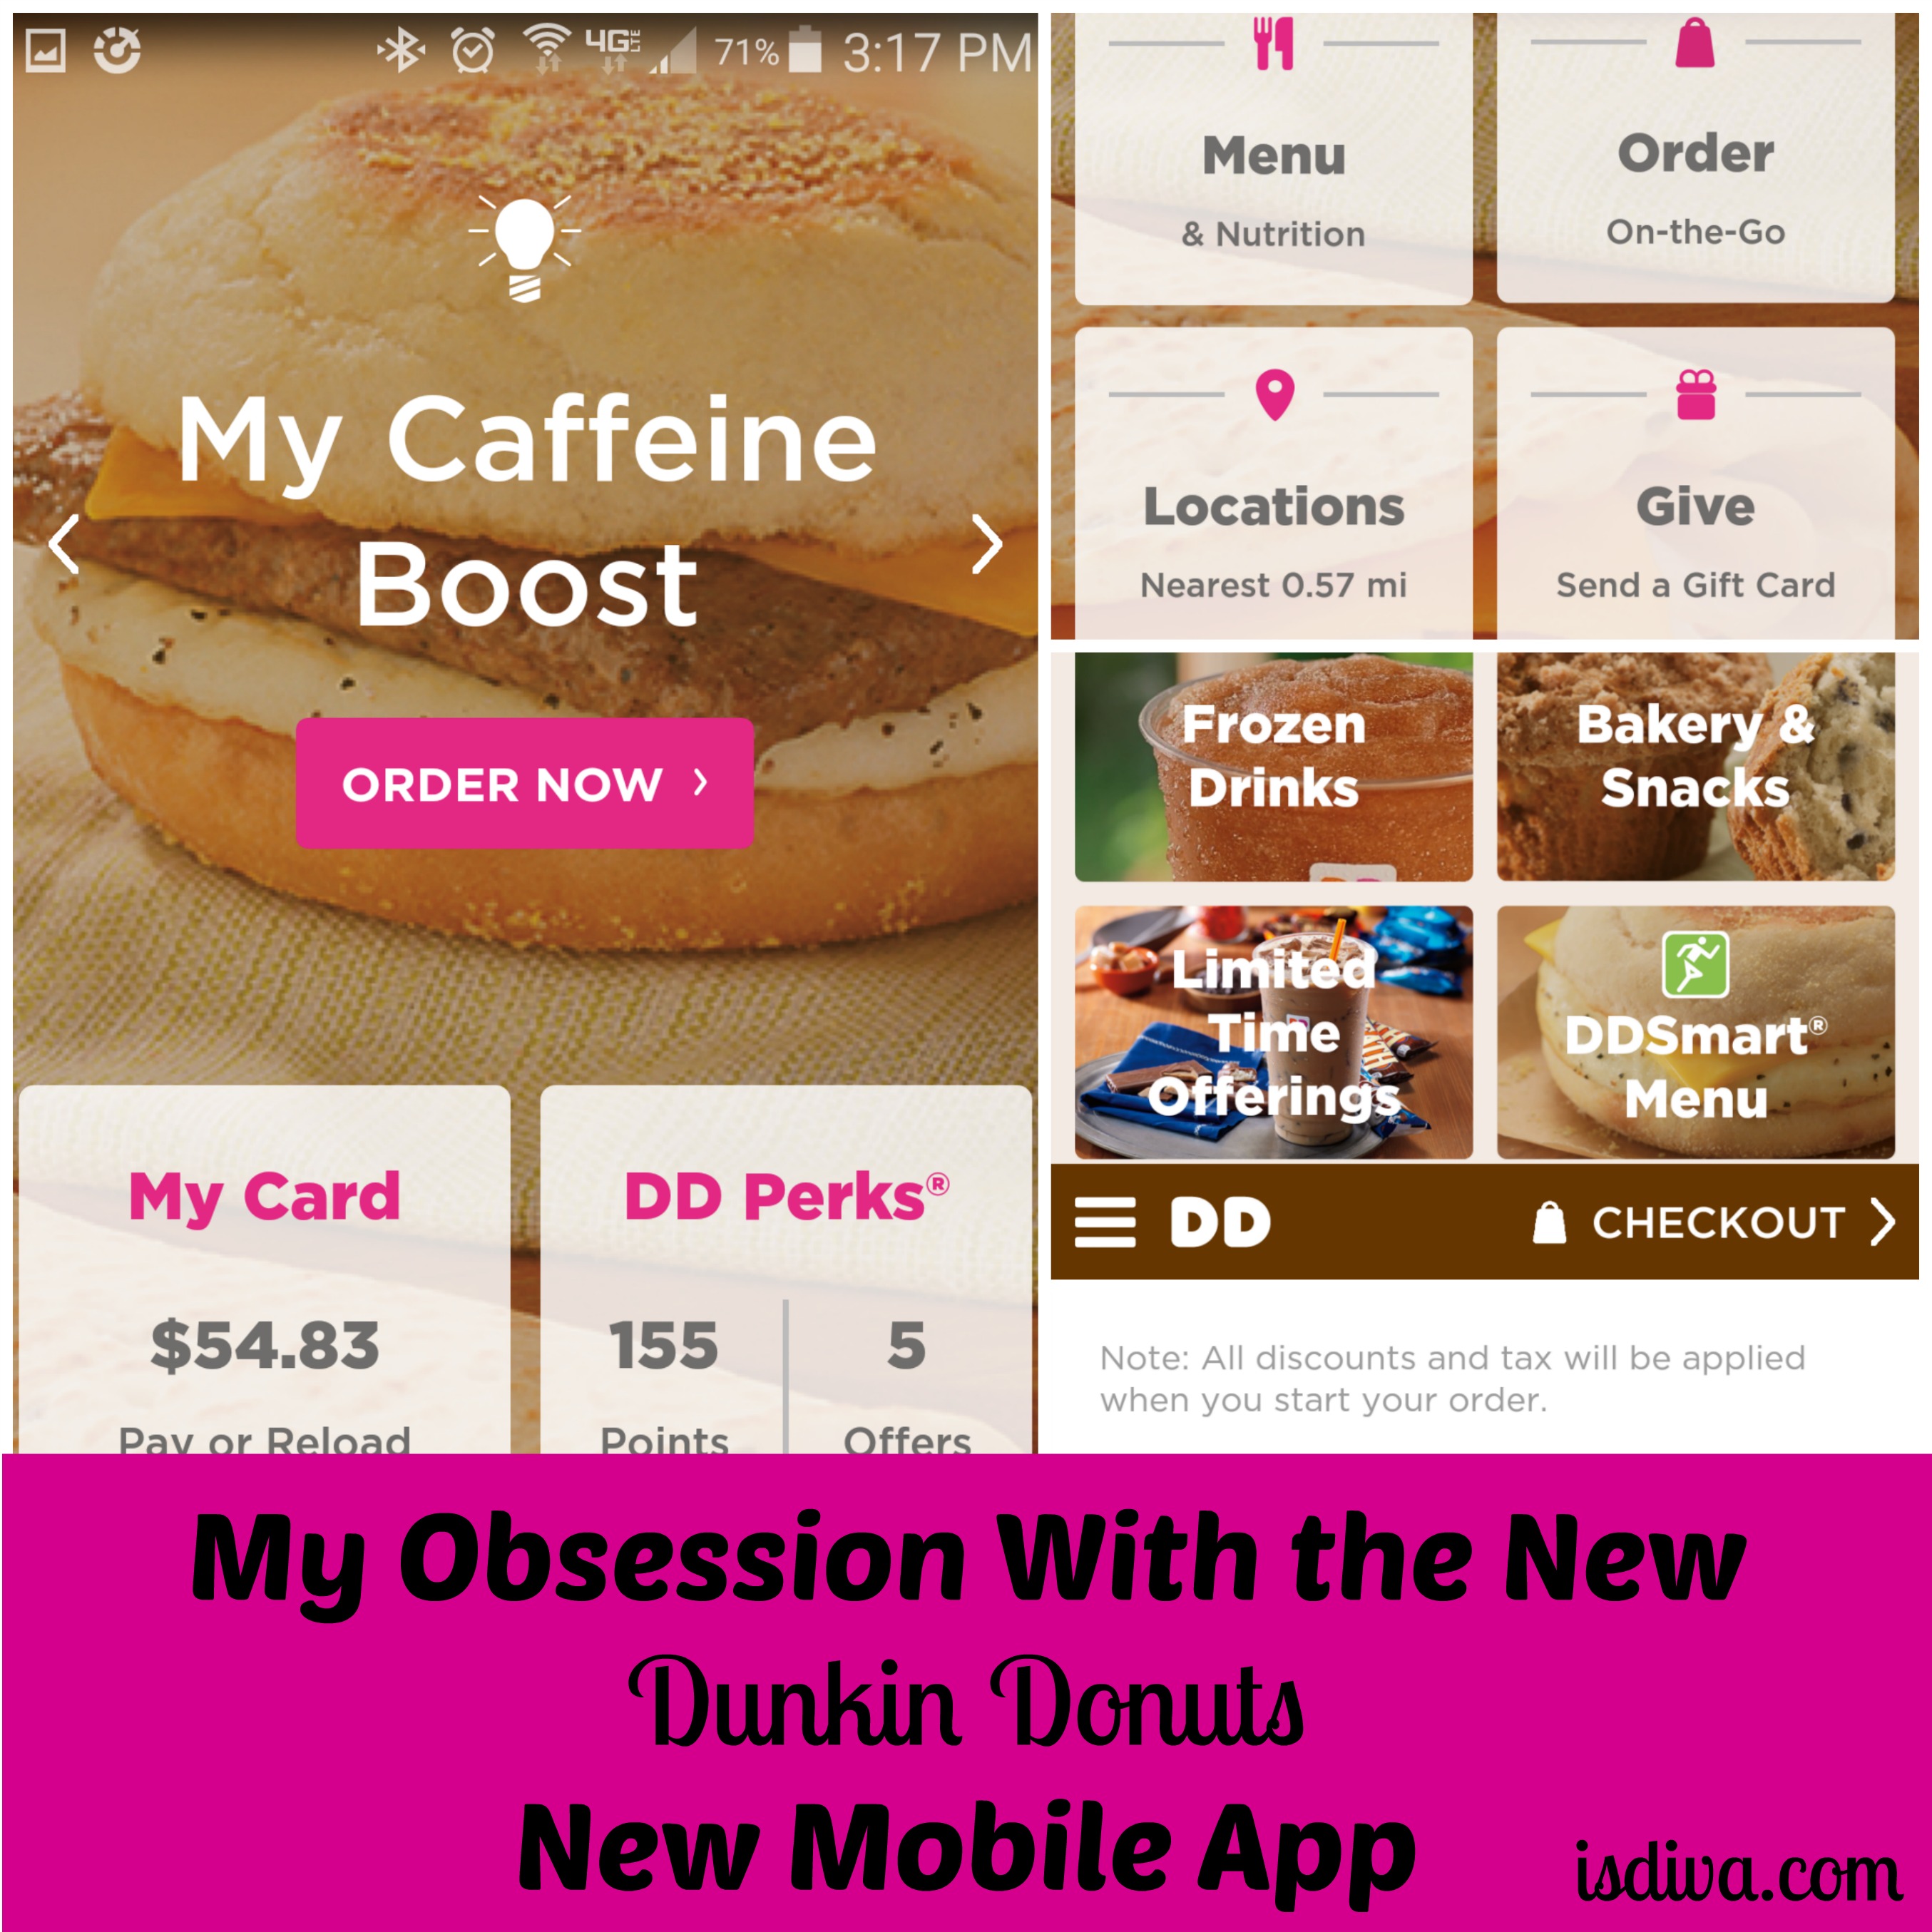 Dunkin Donuts has a new Dunkin Donuts Application that saves you money and time. Download this application today to find the closest Dunkin Donuts to you and take advantages of perks such as Dunkin Donuts coupons.